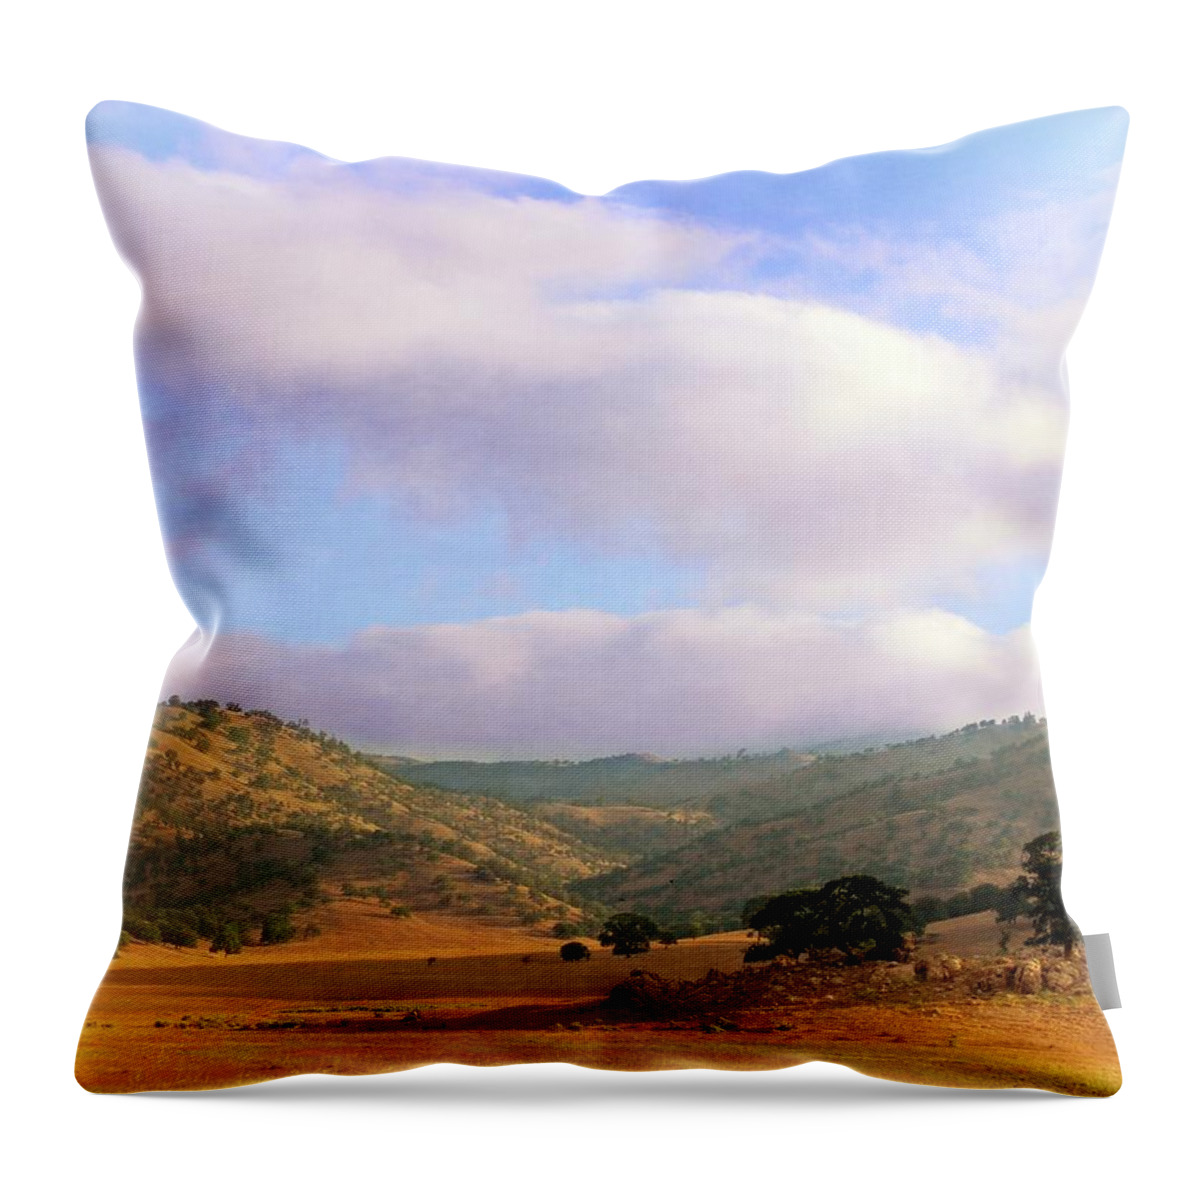 Tehachapi Throw Pillow featuring the photograph Tehachapi Valley by Timothy Bulone